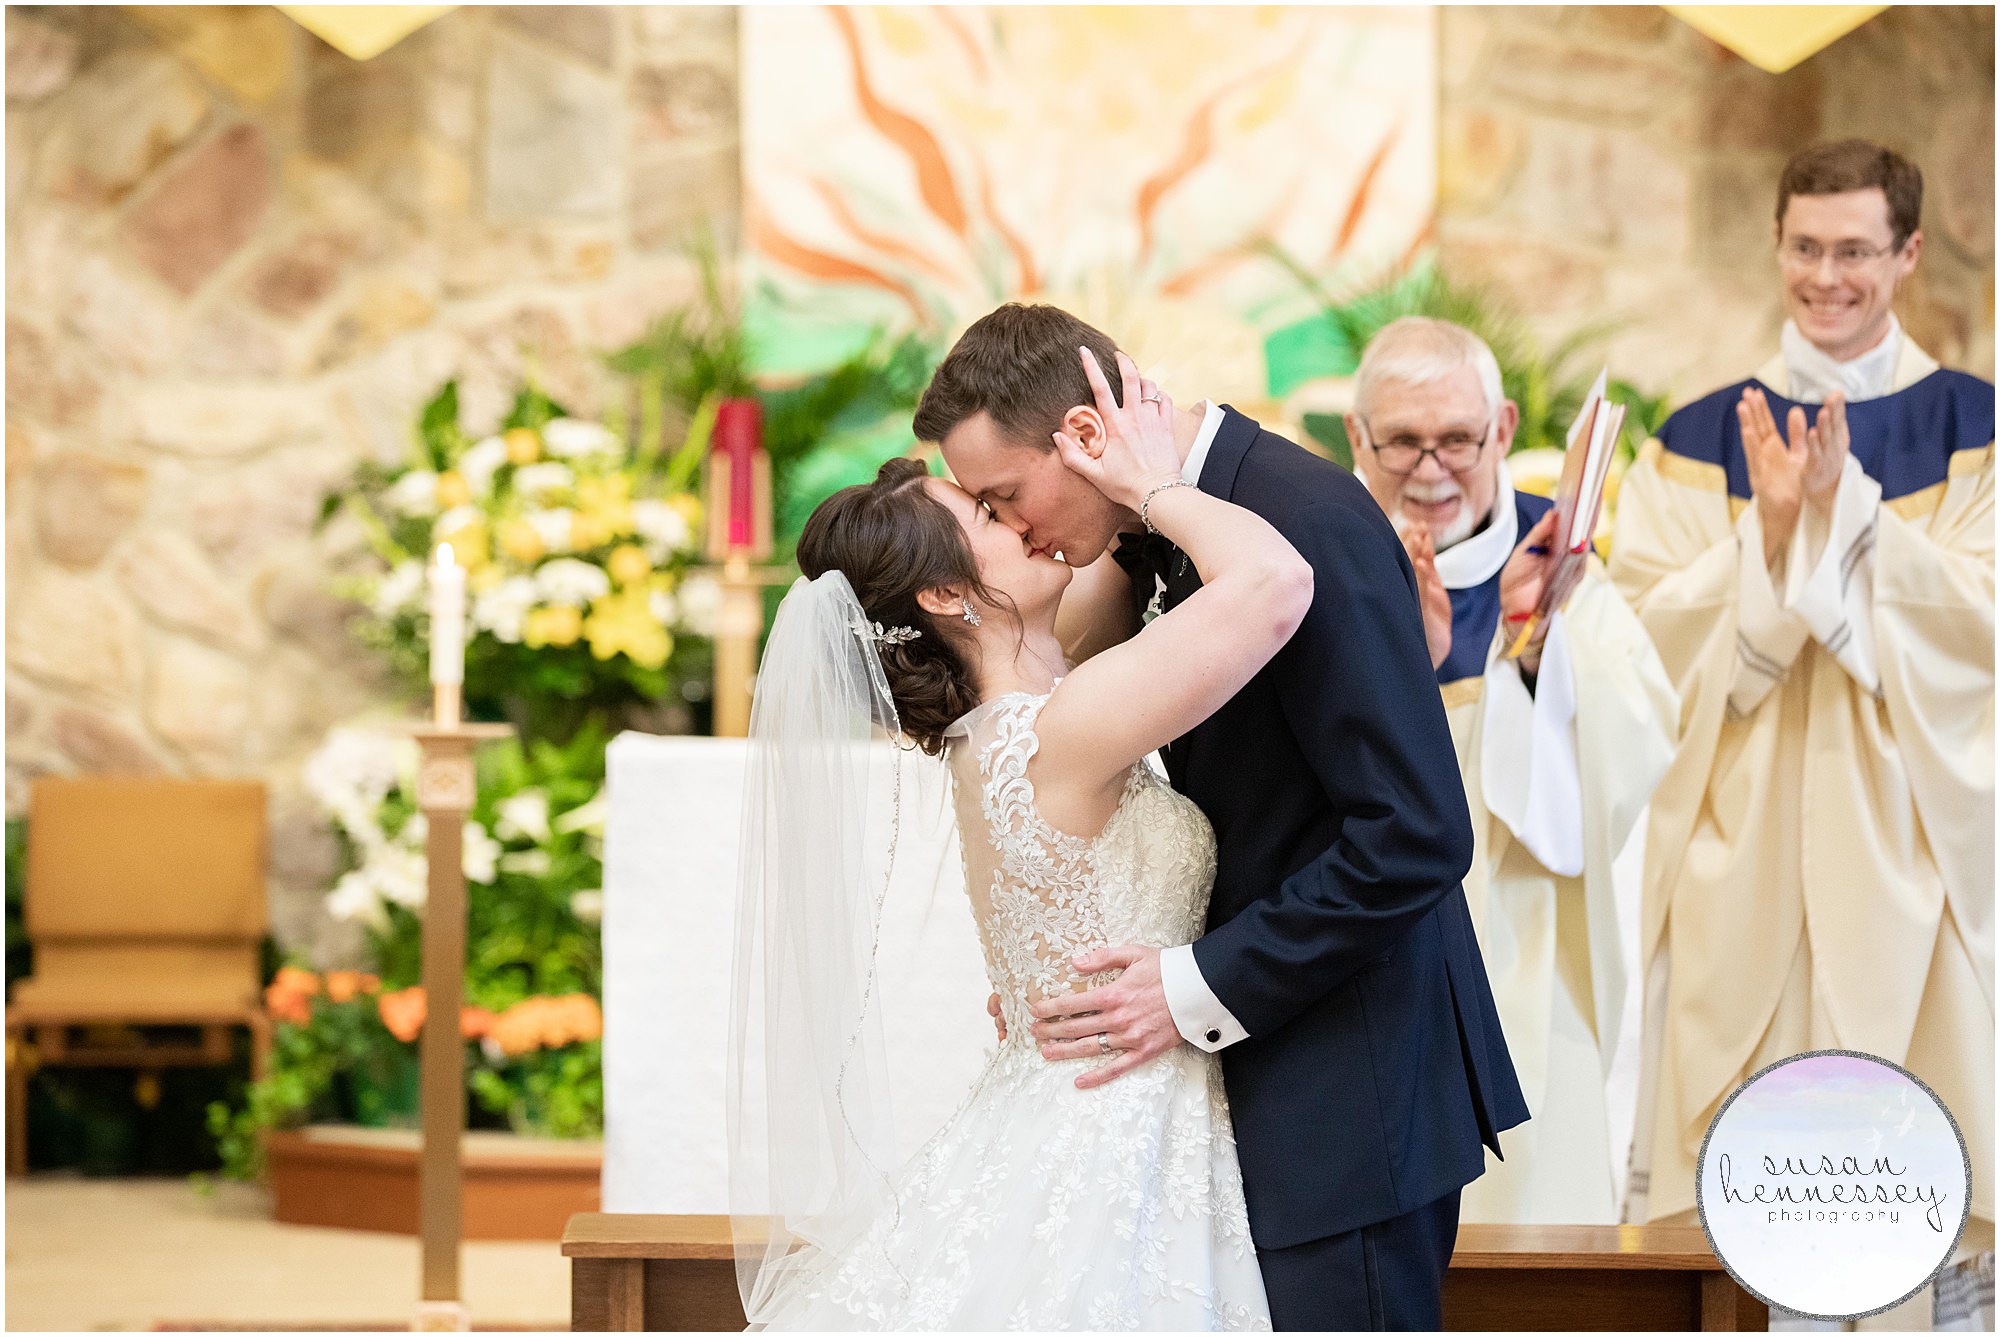 Bride and groom kiss for first time as husband and wife!